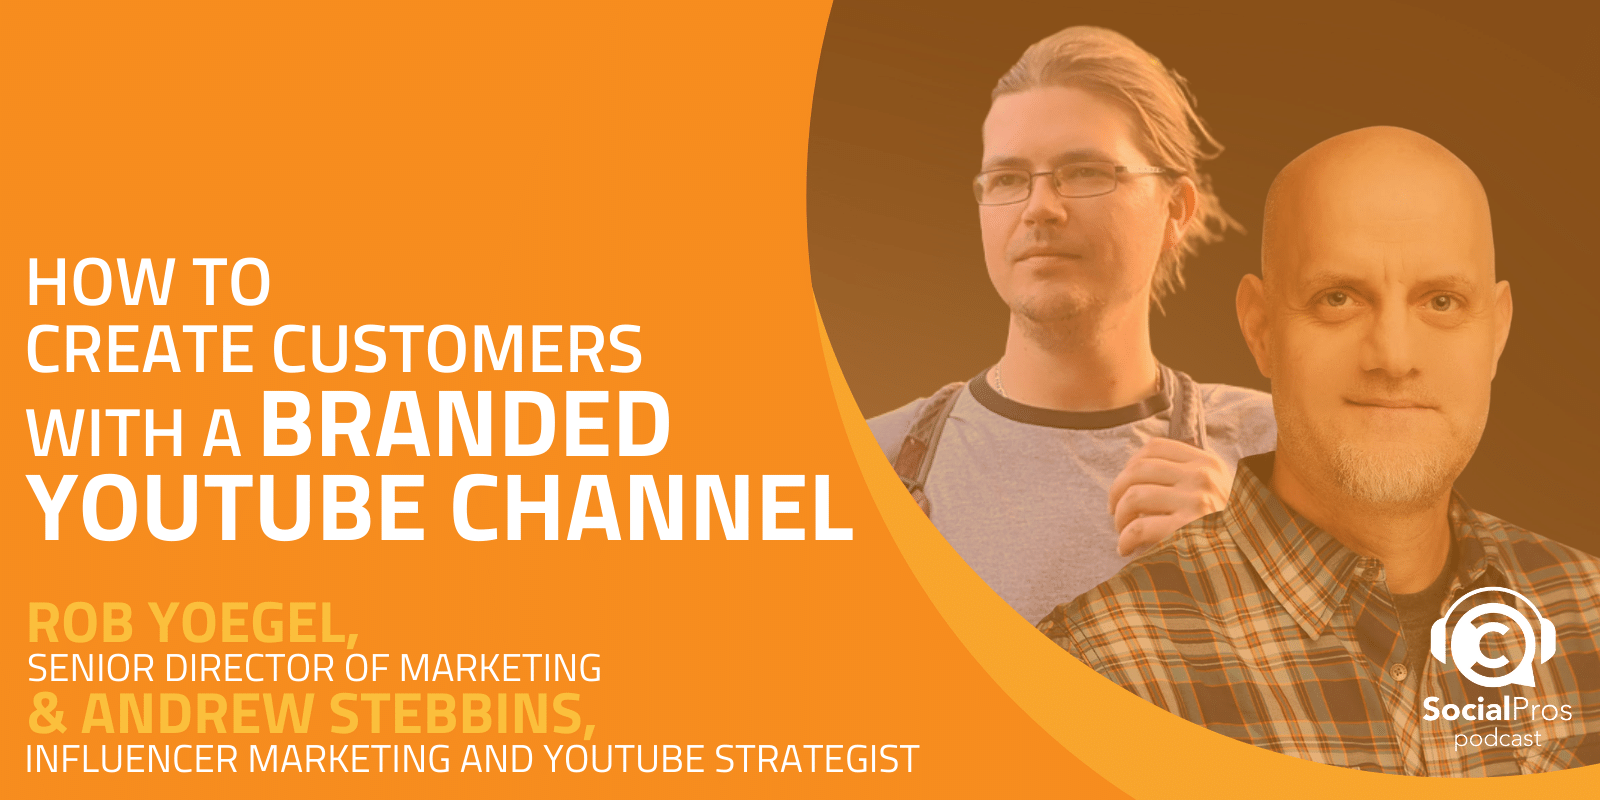 How to Create Customers with a Branded YouTube Channel